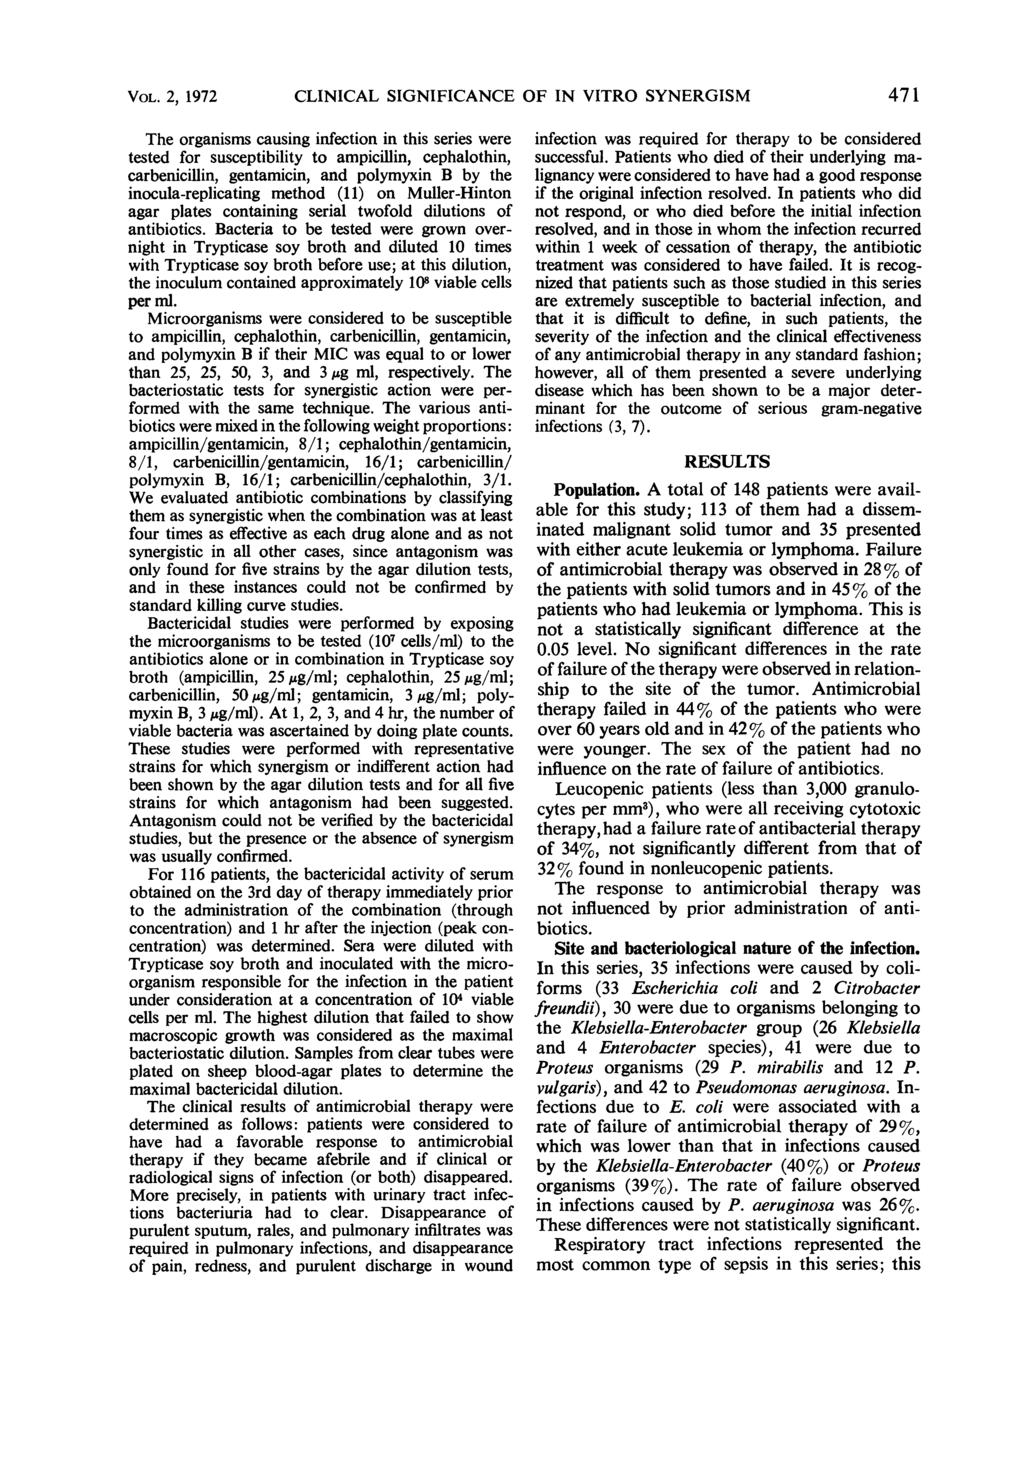 VOL. 2, 1972 CLINICAL SIGNIFICANCE OF IN VITO SYNEGISM 471 The organisms causing infection in this series were tested for susceptibility to ampicillin, cephalothin, carbenicillin, gentamicin, and